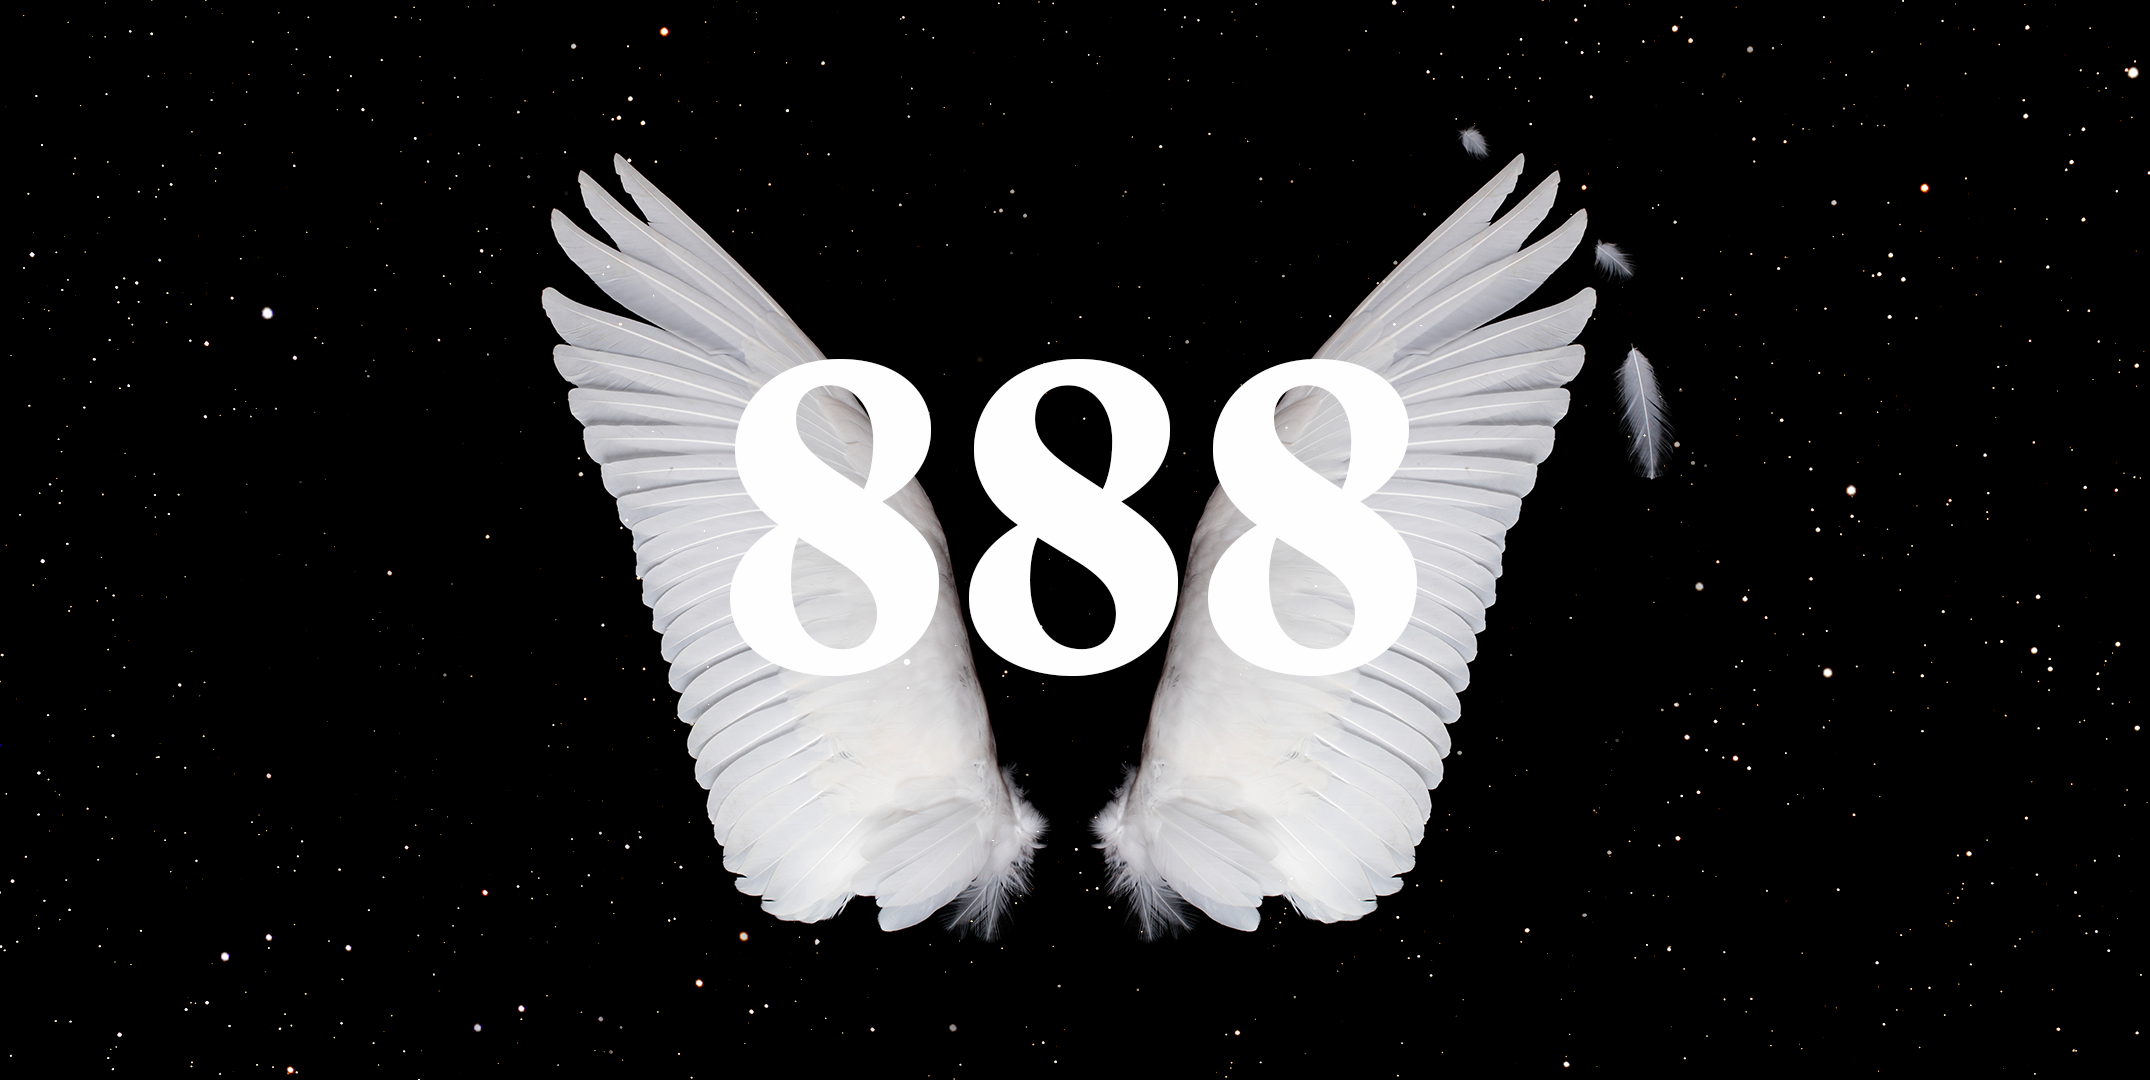 Angel Number 888 Spiritual Meaning in Love, Twin Flames